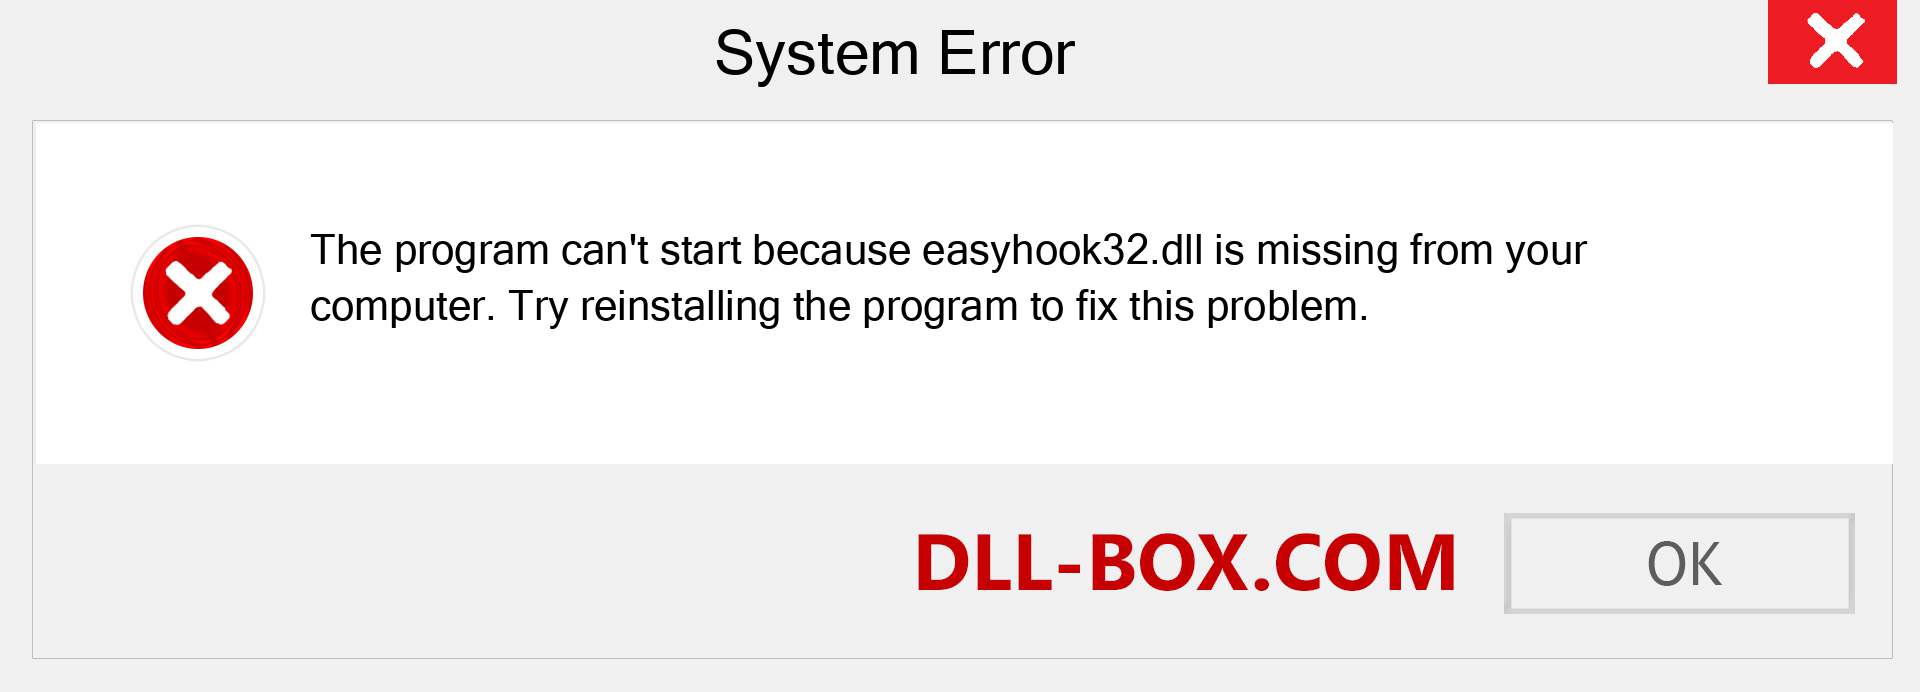  easyhook32.dll file is missing?. Download for Windows 7, 8, 10 - Fix  easyhook32 dll Missing Error on Windows, photos, images